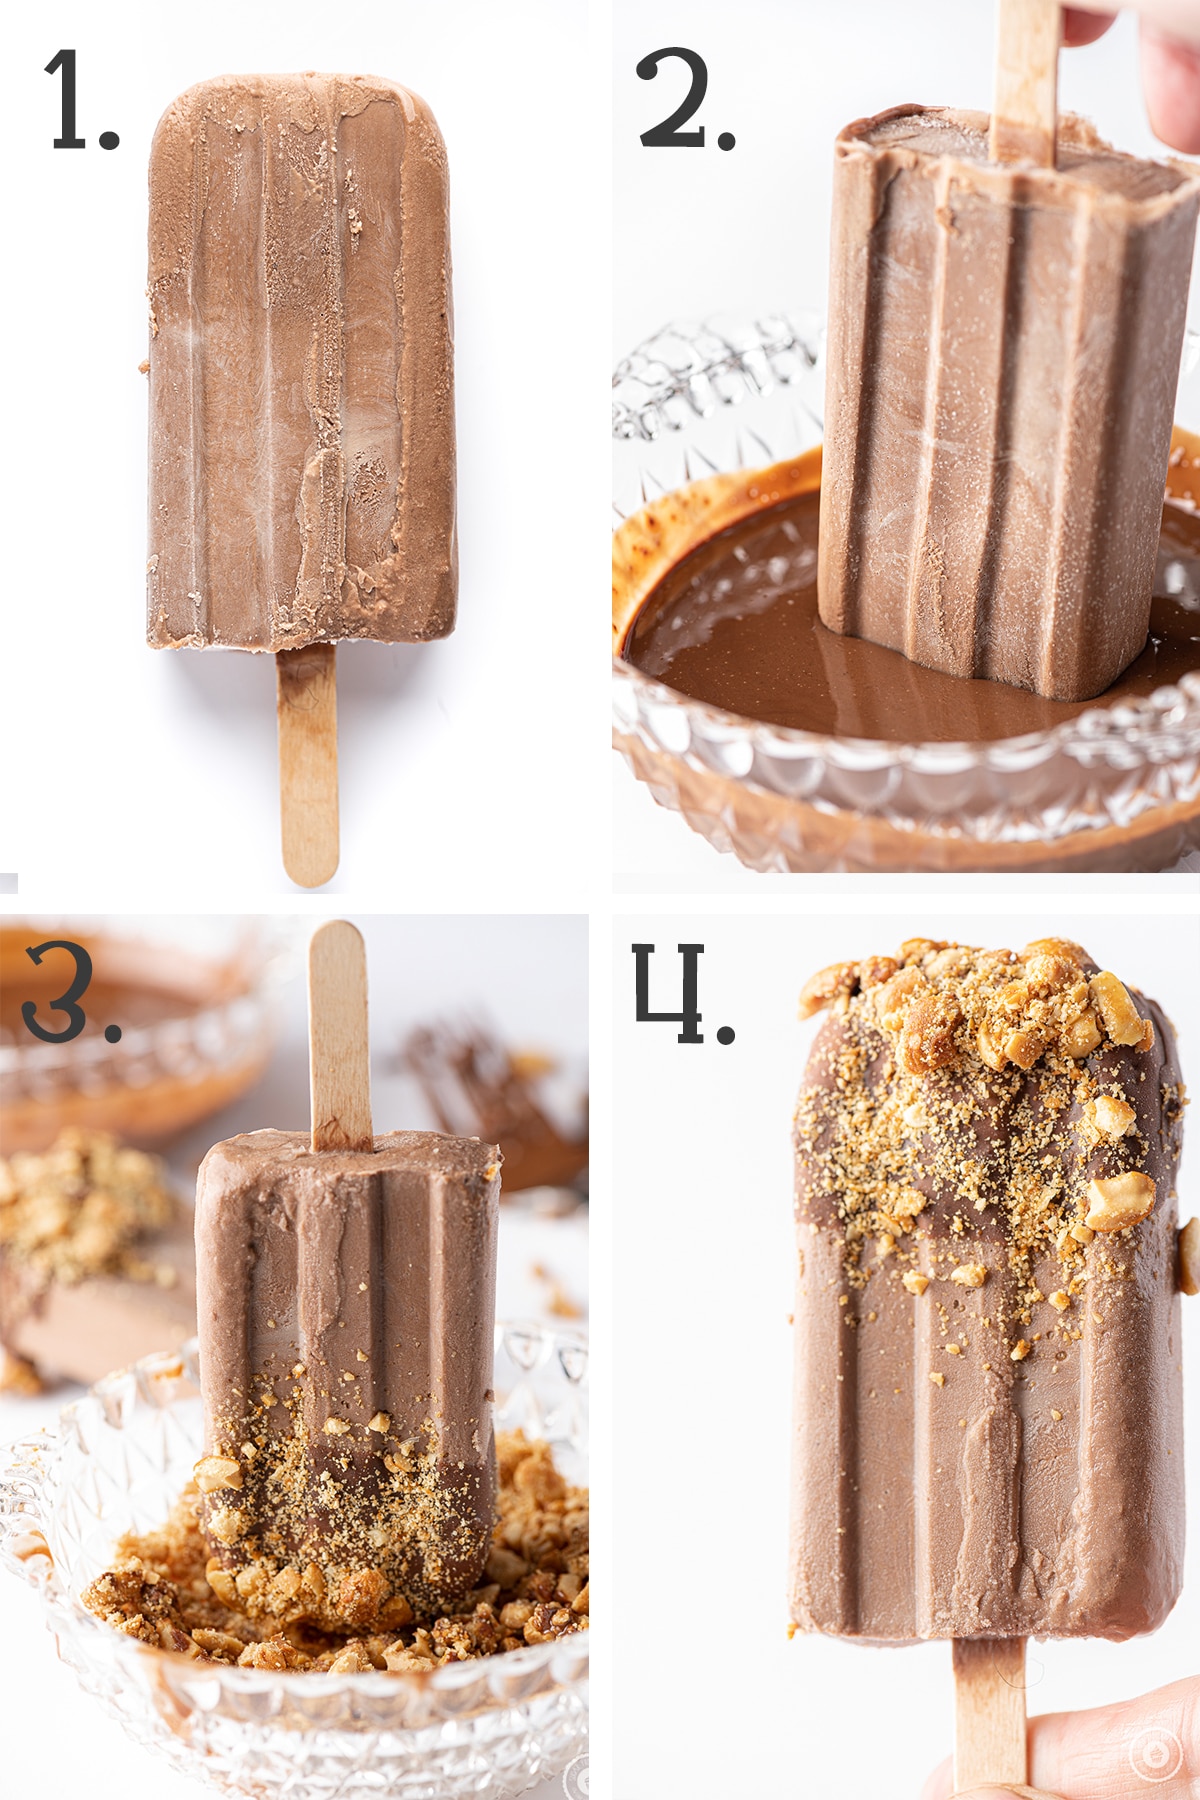 Four panel in process photos showing a frozen fudgescicle being dipped in melted chocolate coating and peanuts. 